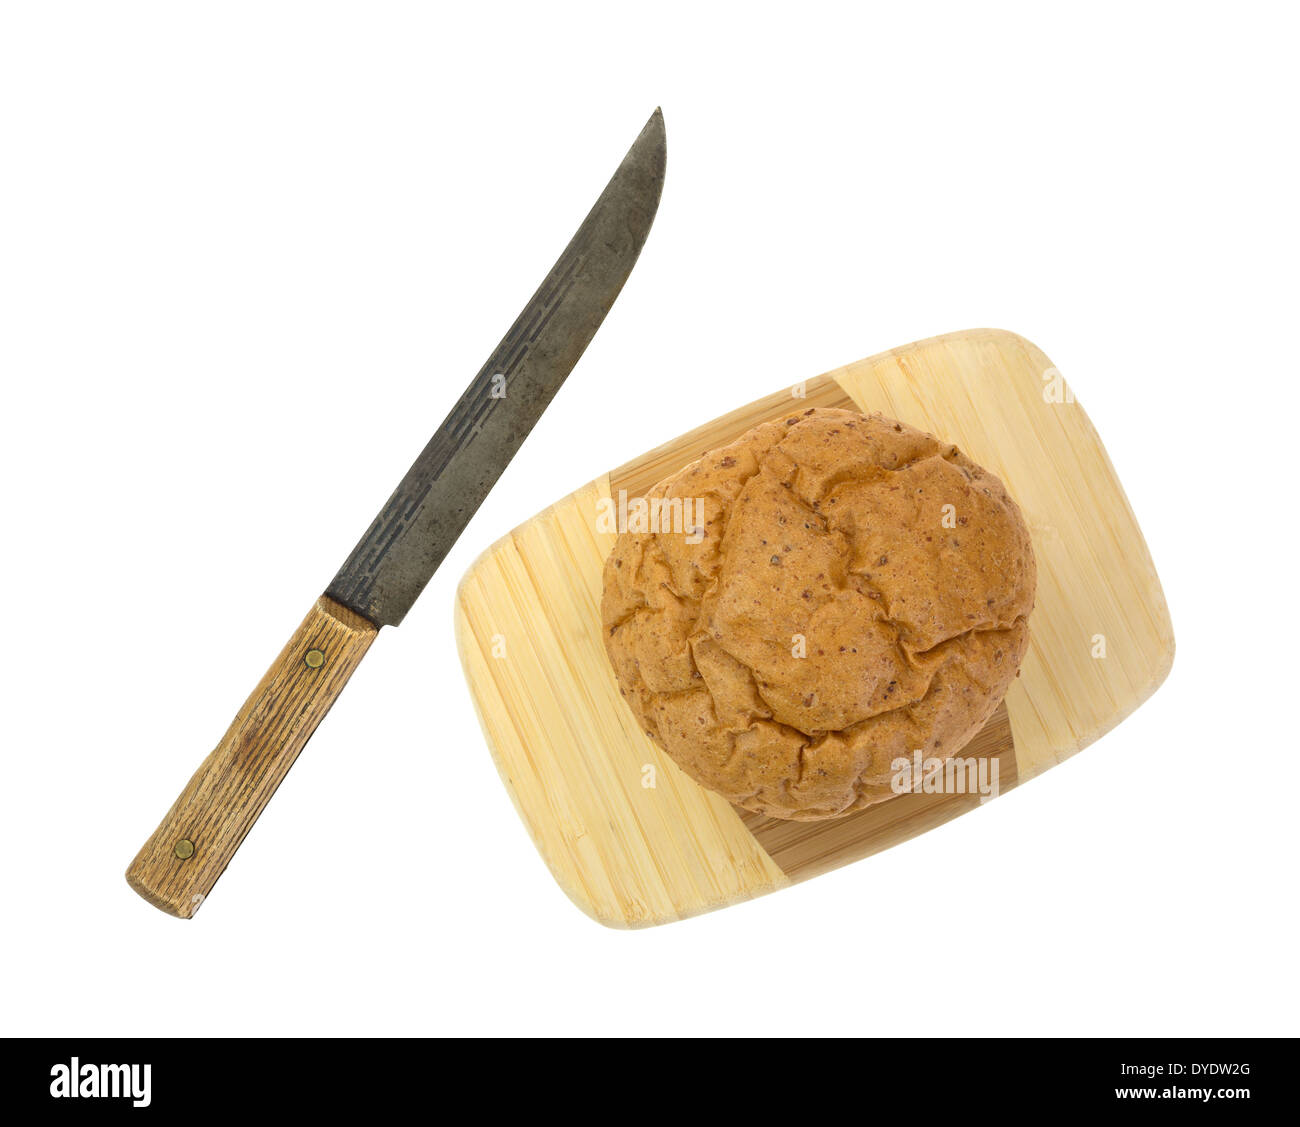 A small whole wheat boule bread on a wood cutting board with an old kitchen knife to the side. Stock Photo